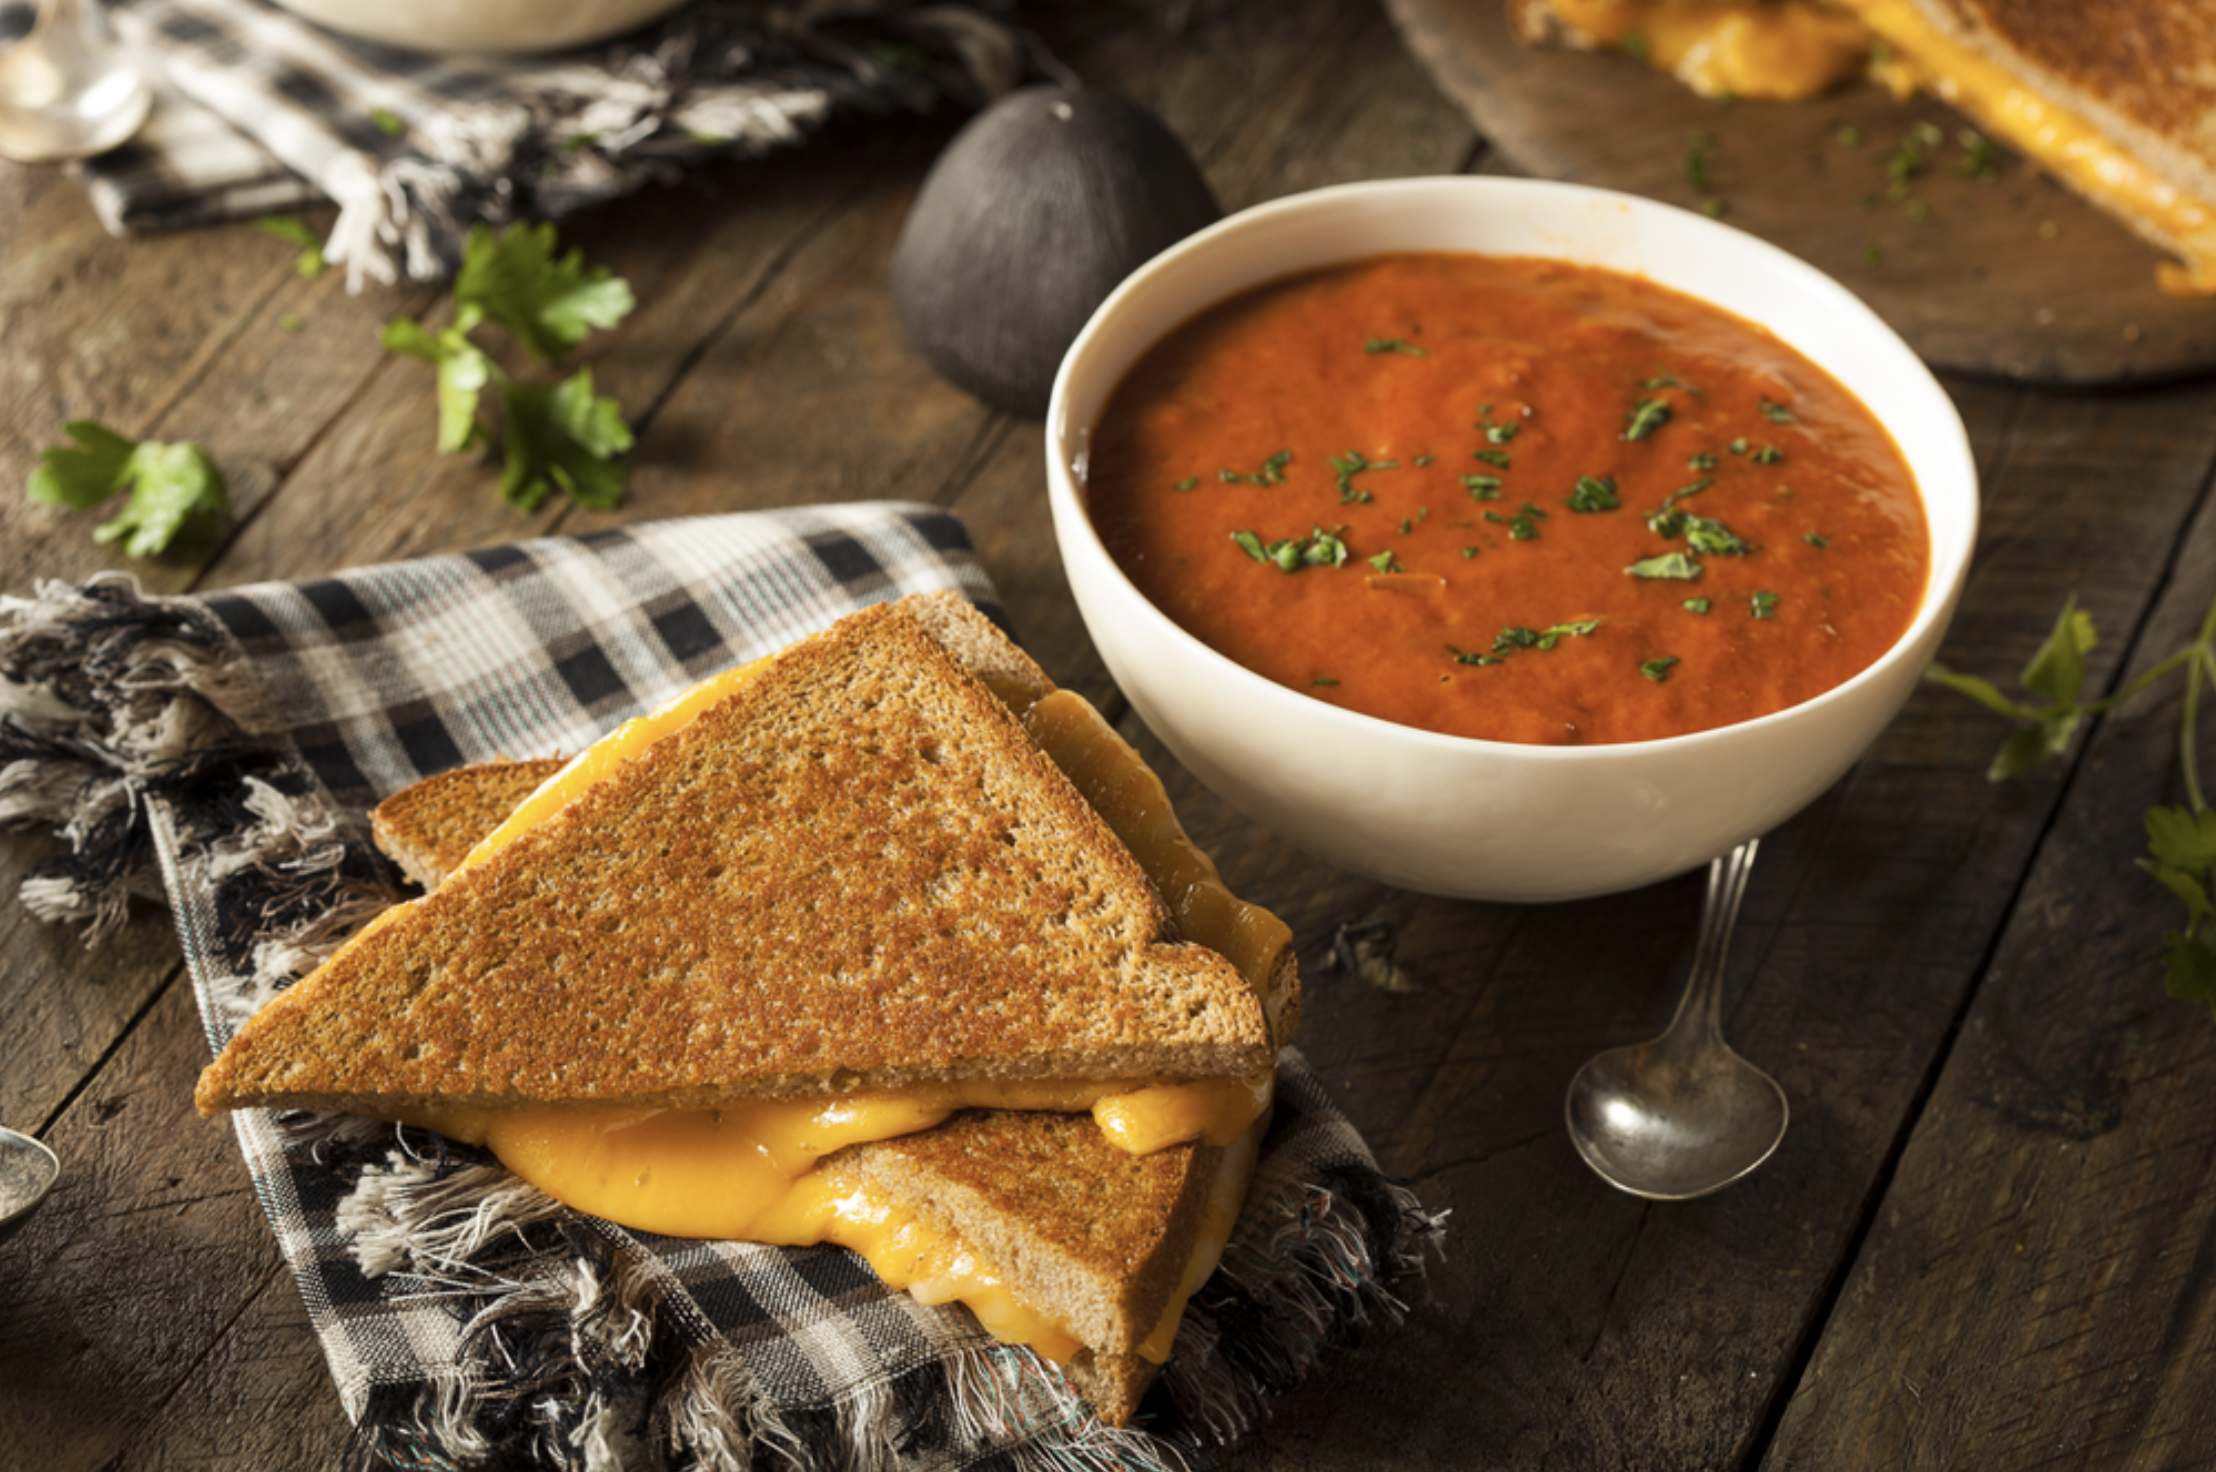 A classic recipe of grilled cheese sandwich and tomato soup